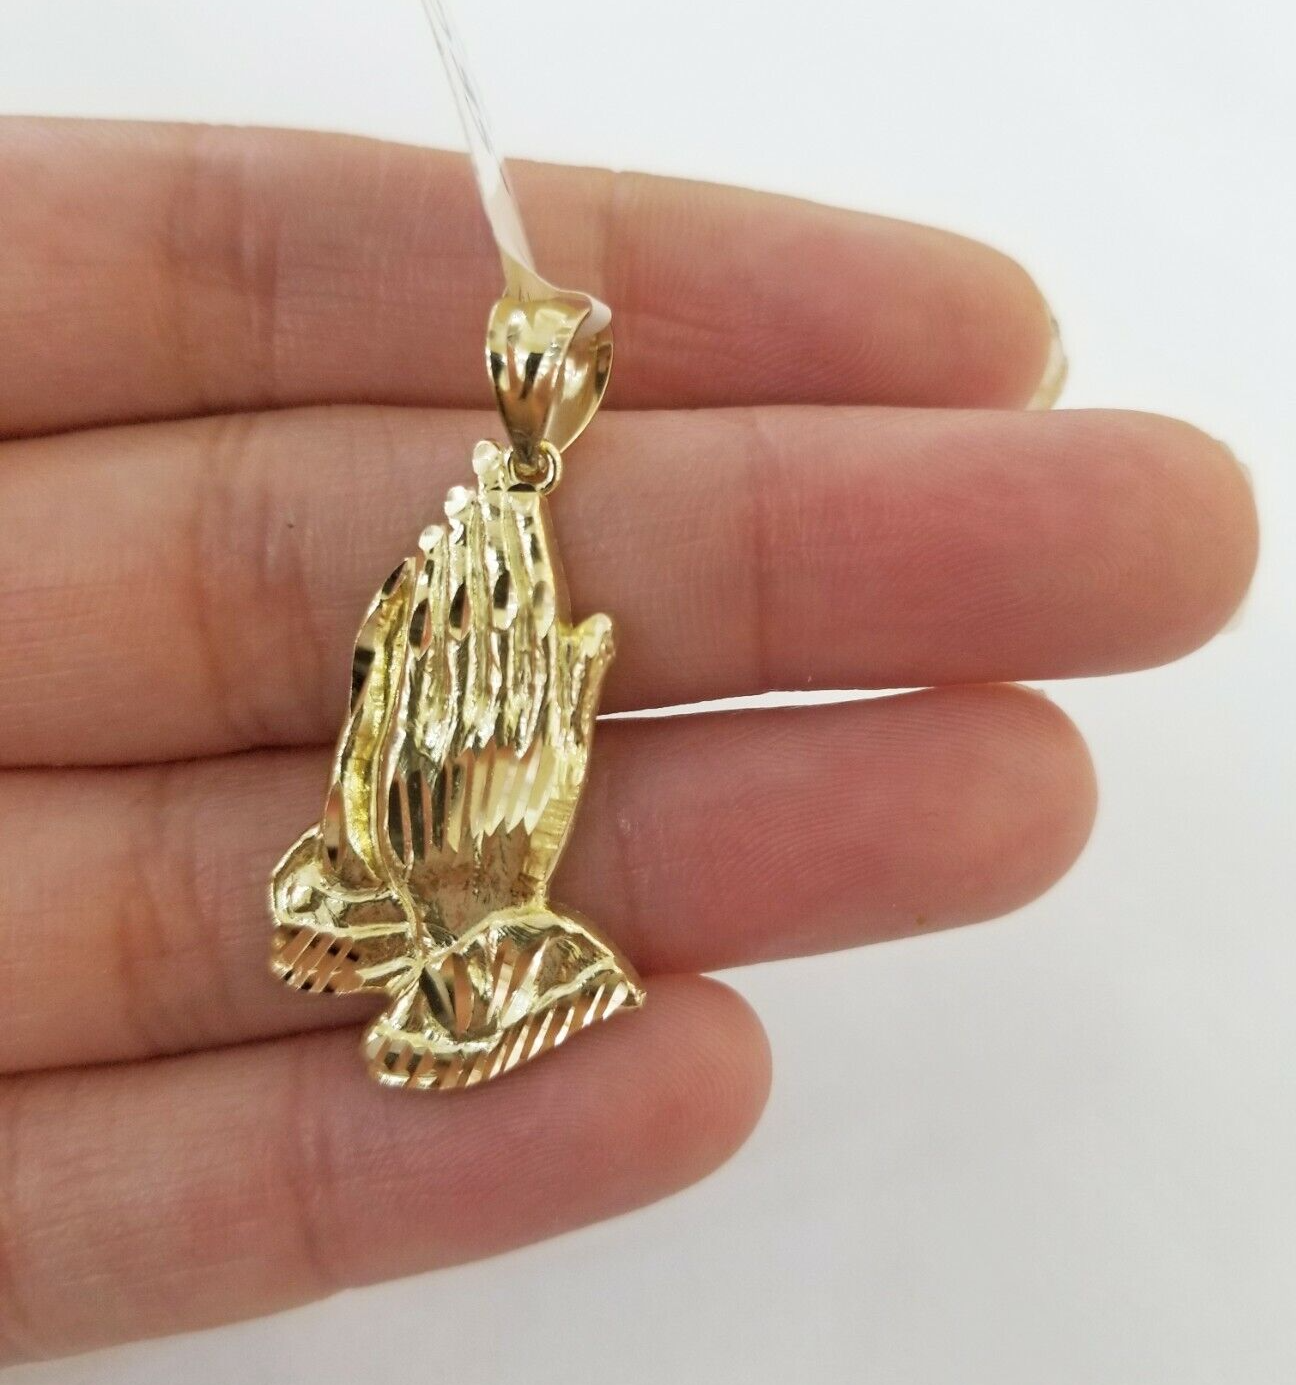 10k Yellow Gold Charm Pendant Praying hand REAL 10kt For chain FREE SHIPPING